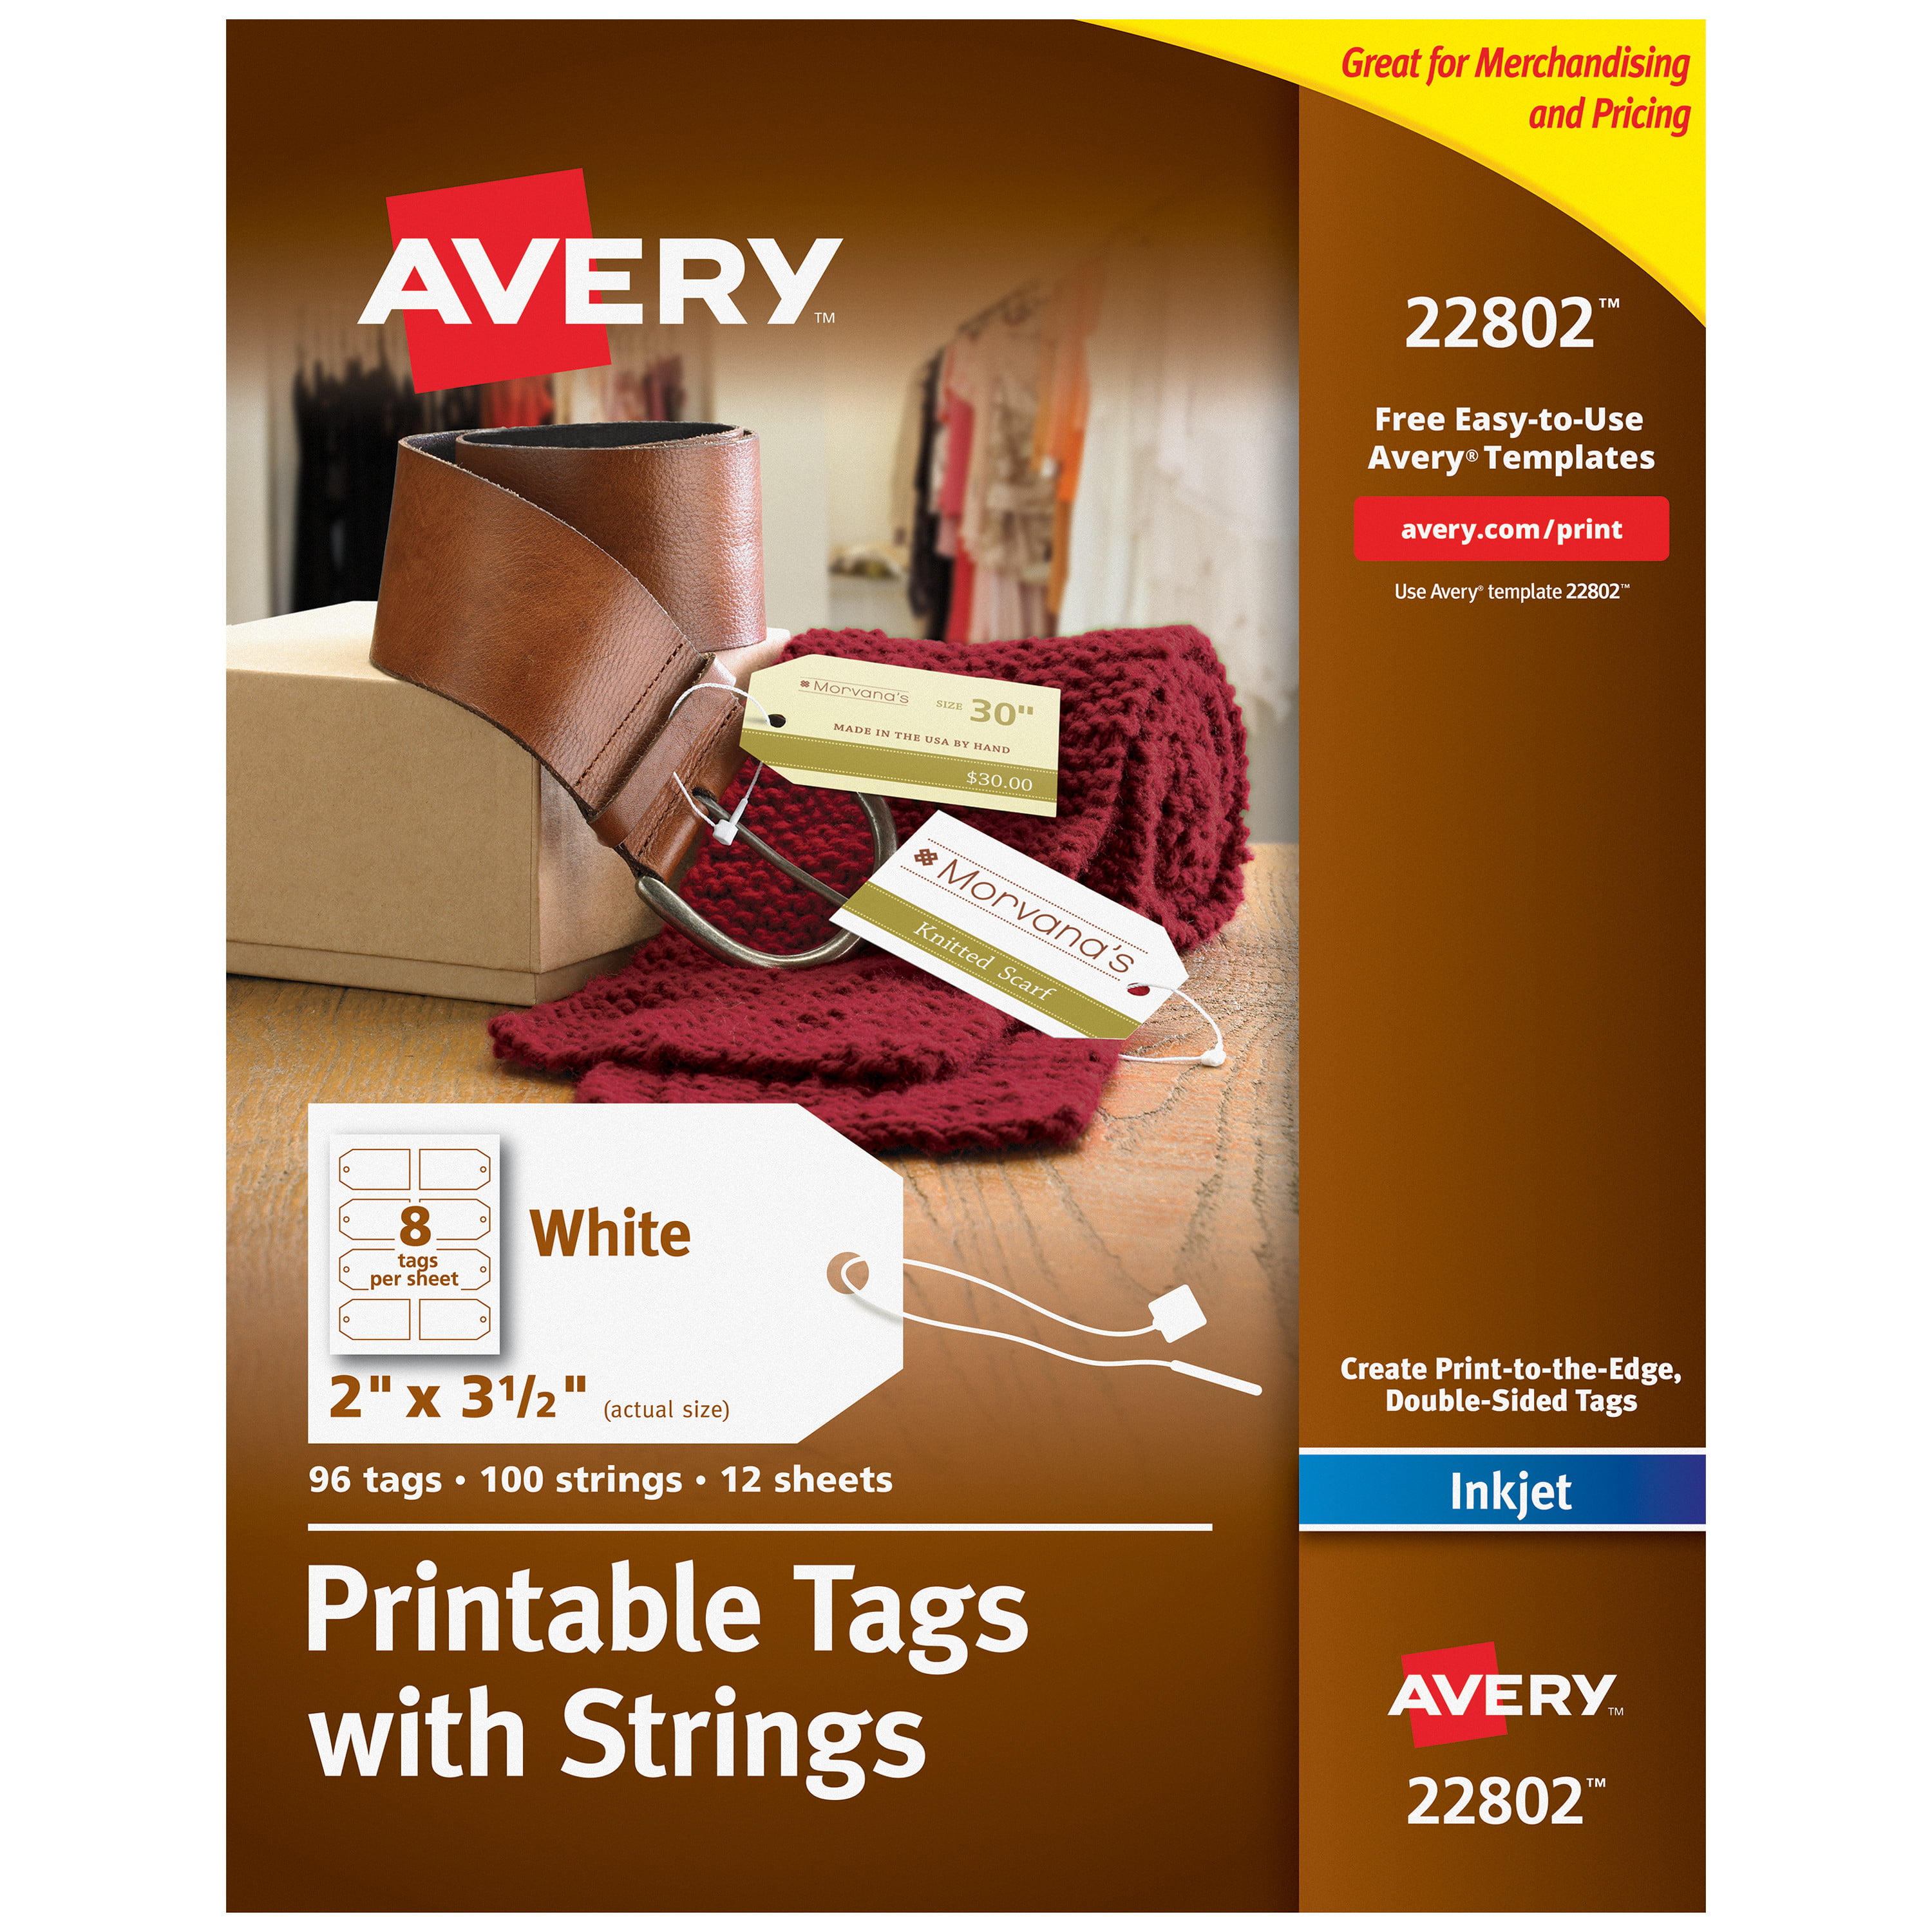 avery-printable-tags-with-strings-2-x-3-1-2-2-side-printing-96